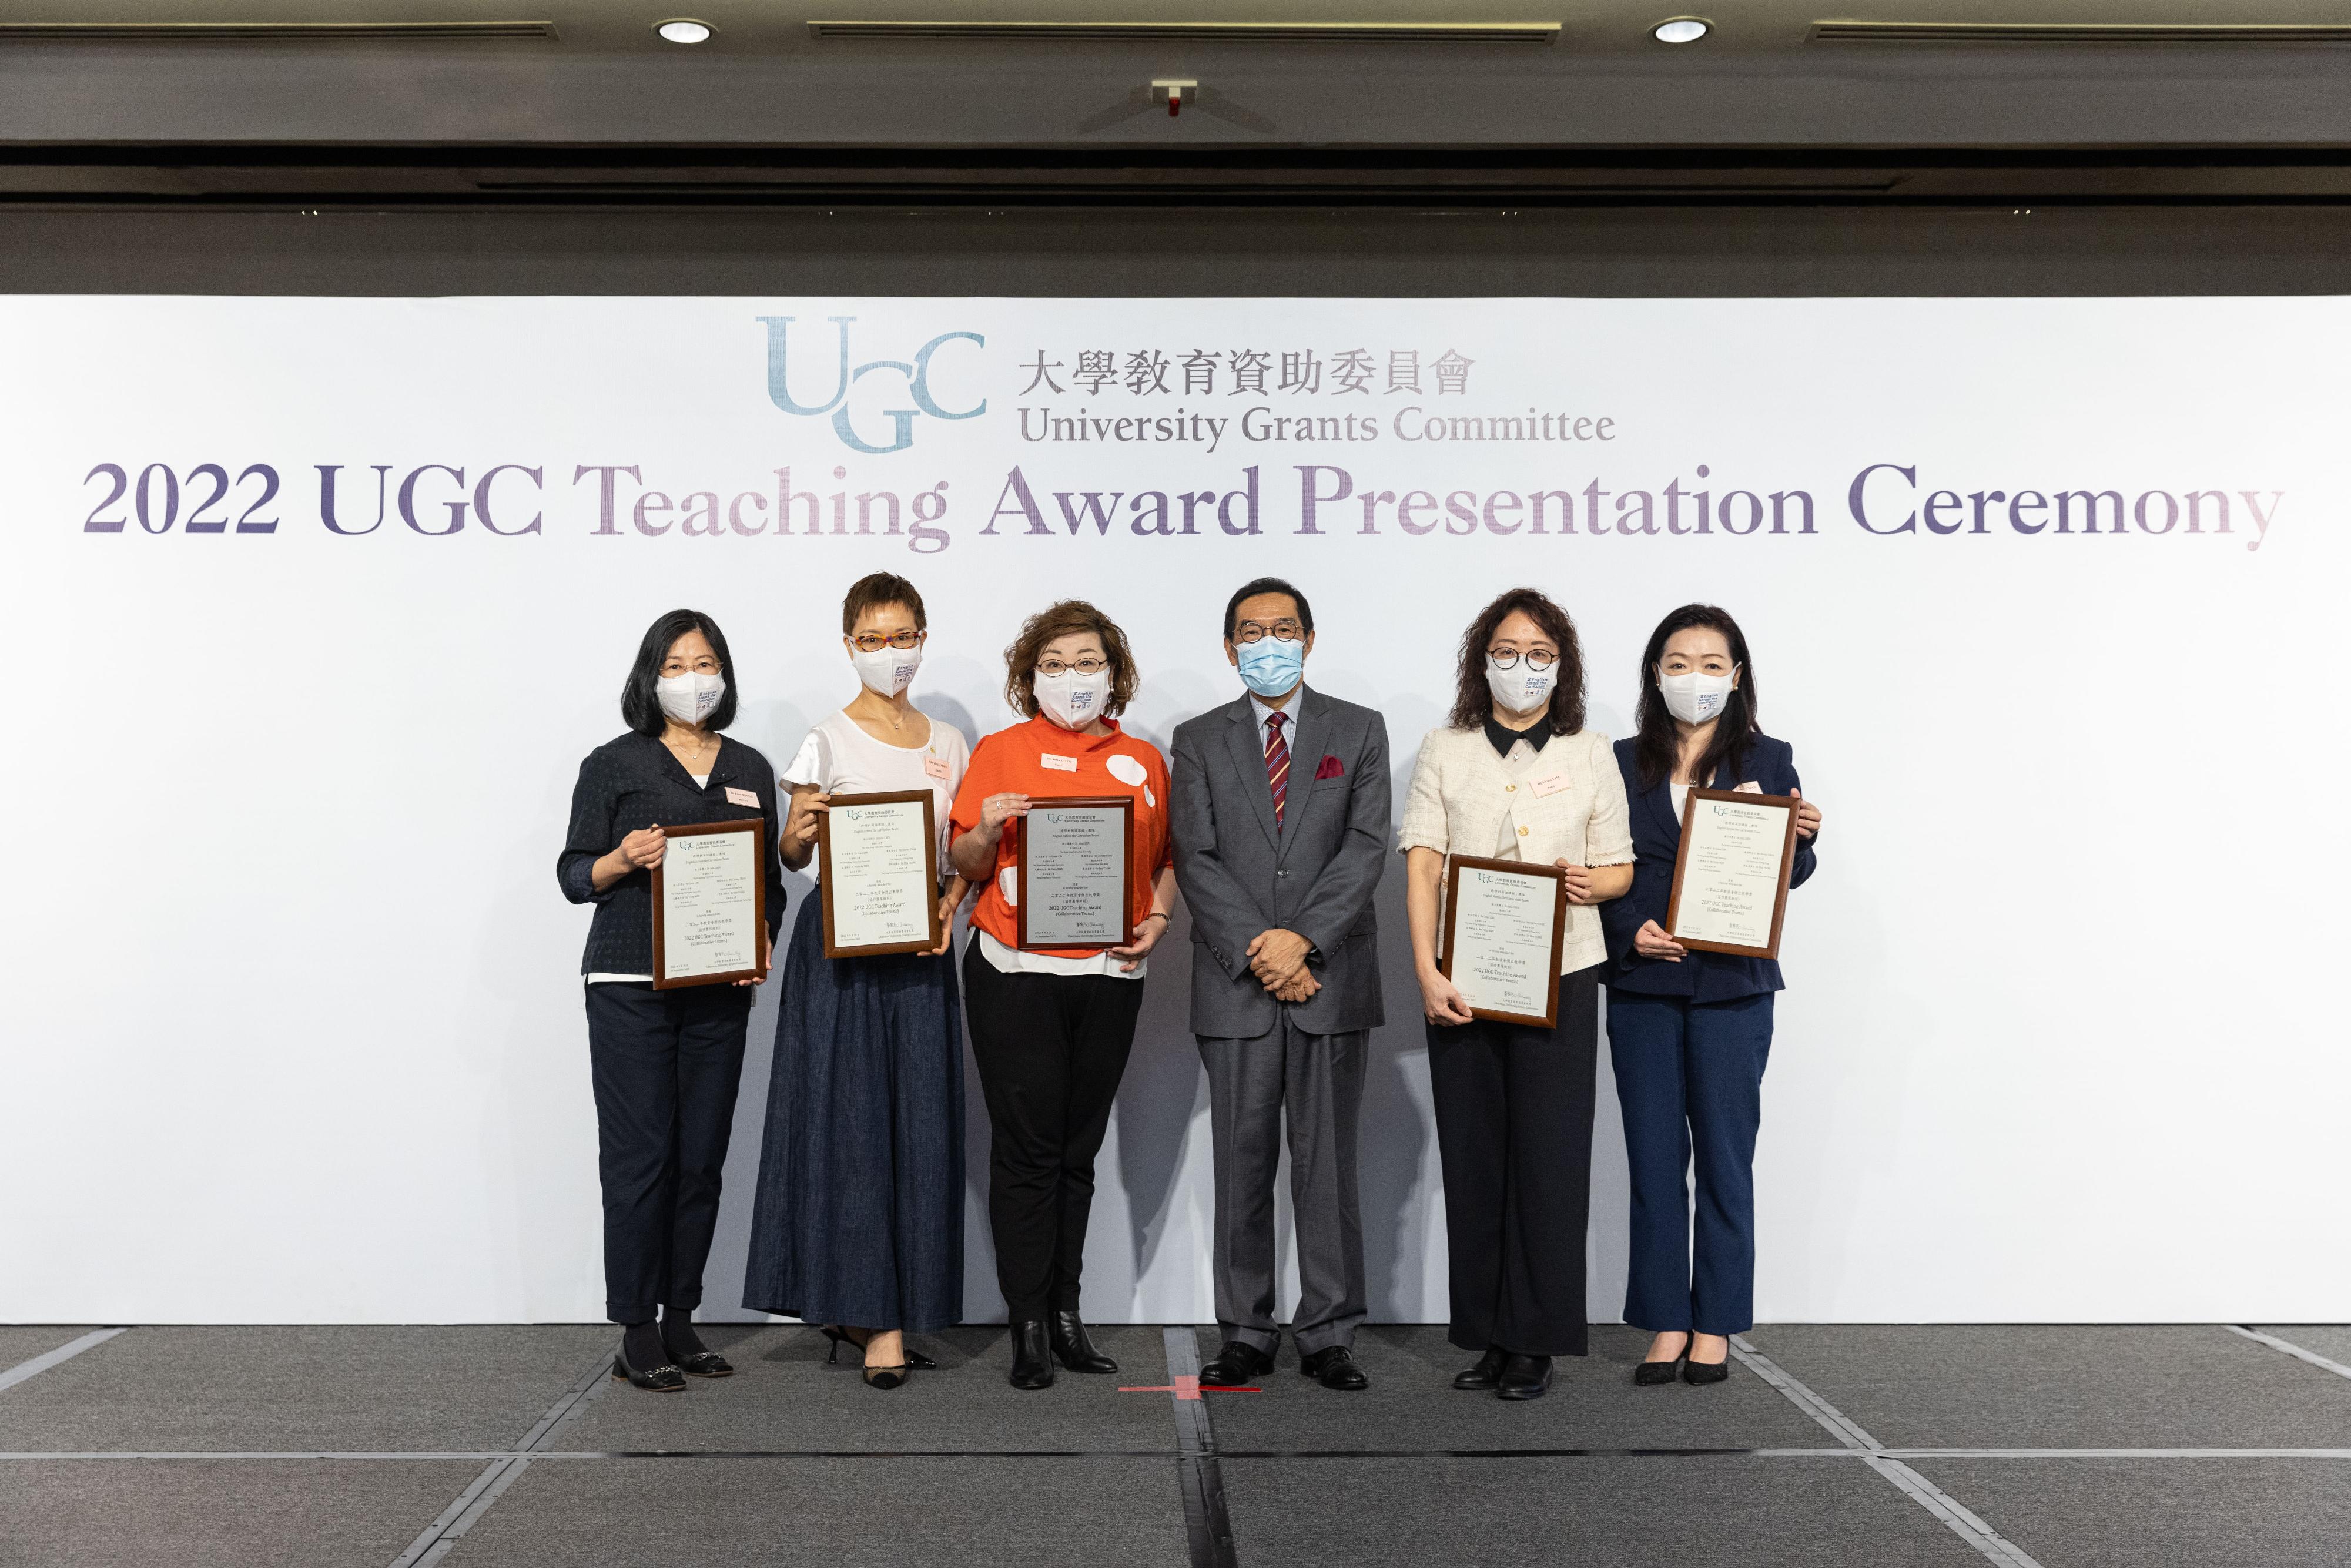 The Chairman of the University Grants Committee (UGC), Mr Carlson Tong (third right), presents the 2022 UGC Teaching Award for Collaborative Teams to the English Across the Curriculum Team.  The team is led by Dr Julia Chen (third left), with Dr Grace Lim (second right), Ms Christy Chan (first right), Ms Vicky Man (second left) and Dr Elza Tsang (first left) as collaborative team members.